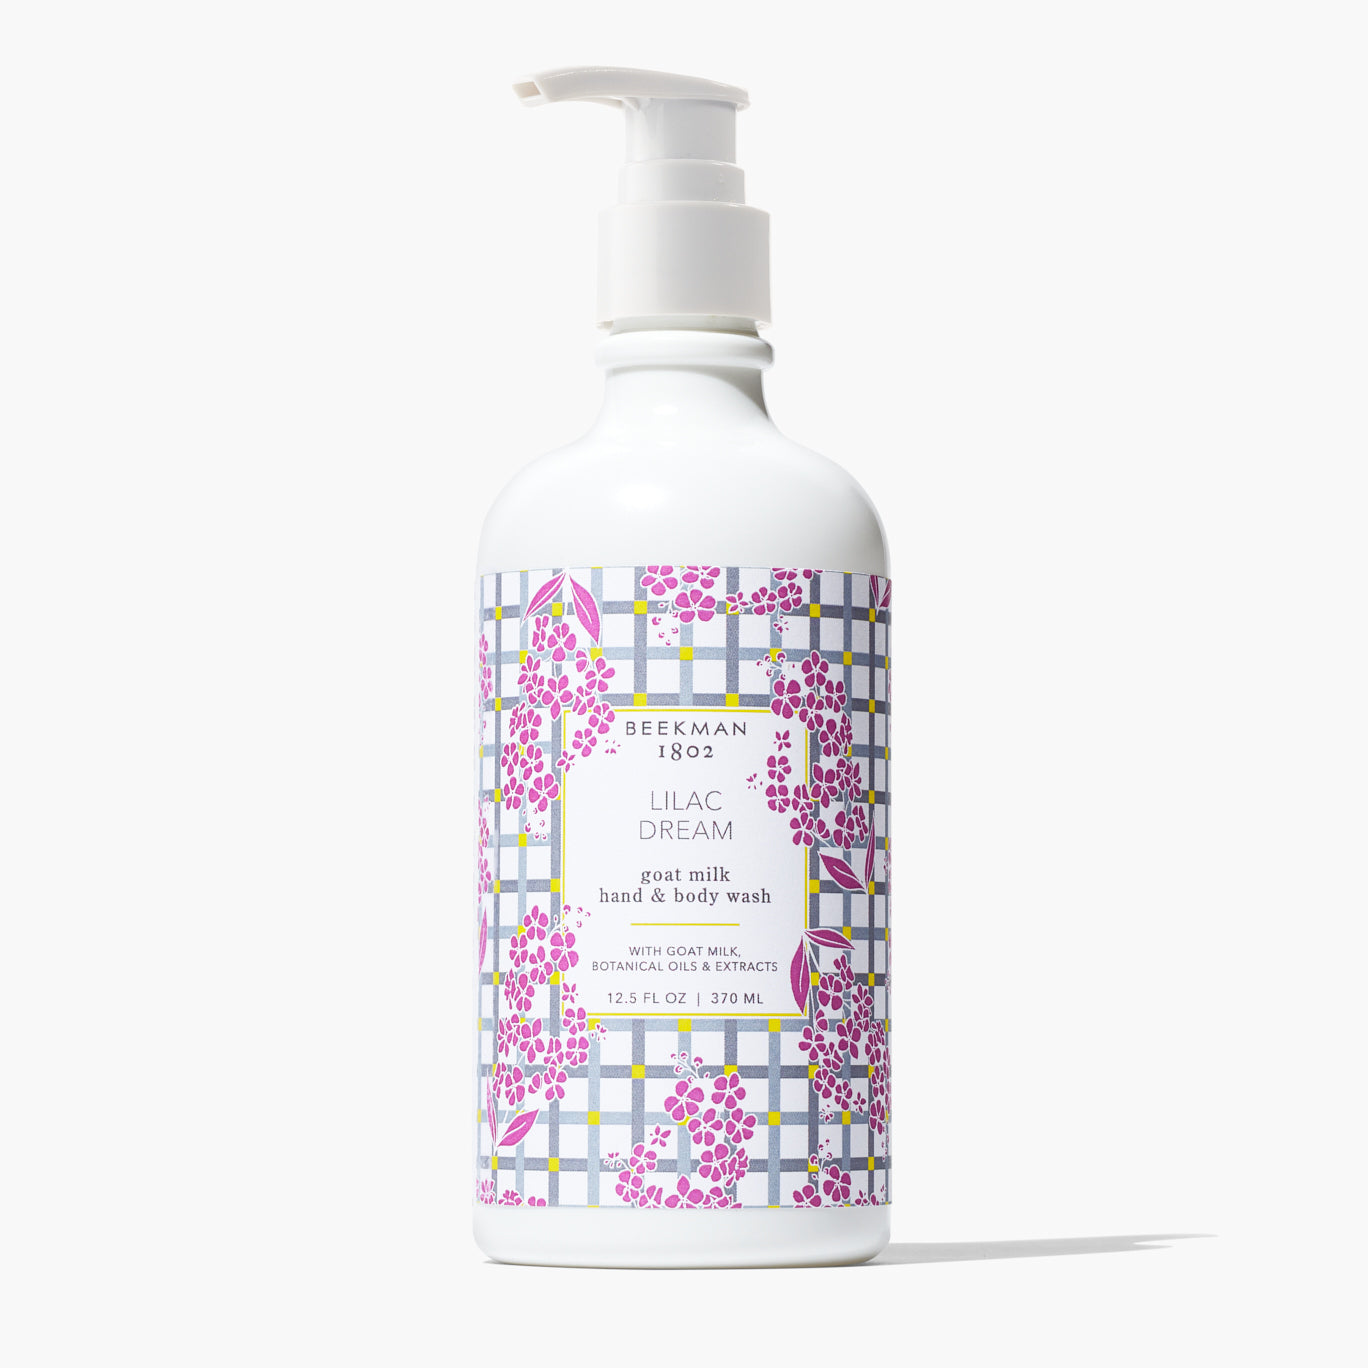 Goats Milk Body Wash for Face, Hand, and Body